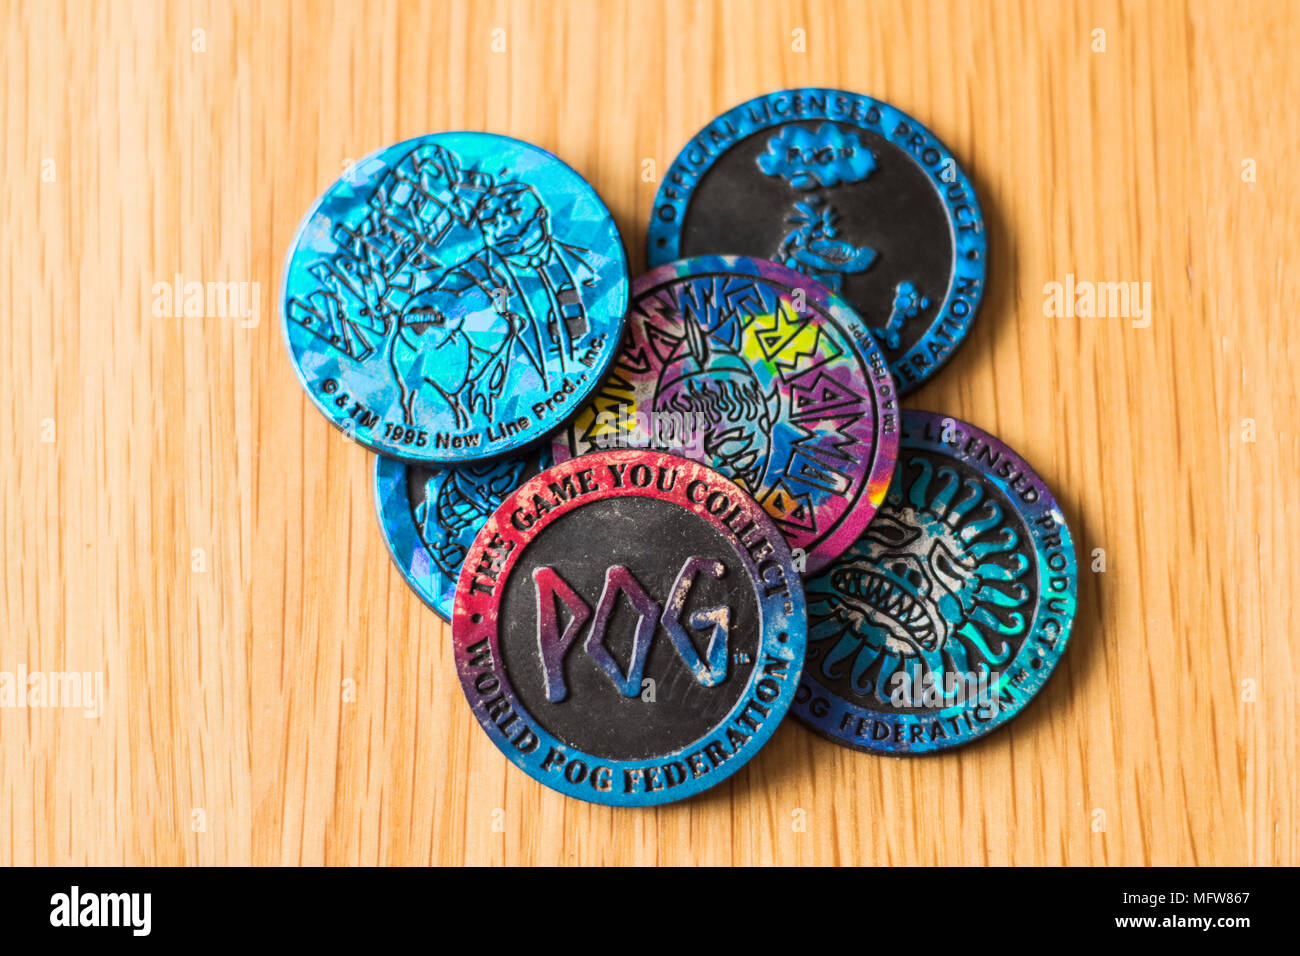 https://c8.alamy.com/comp/MFW867/world-pog-federation-slamers-plastic-round-pogs1990s-game-for-children-group-of-pogs-on-a-table-MFW867.jpg